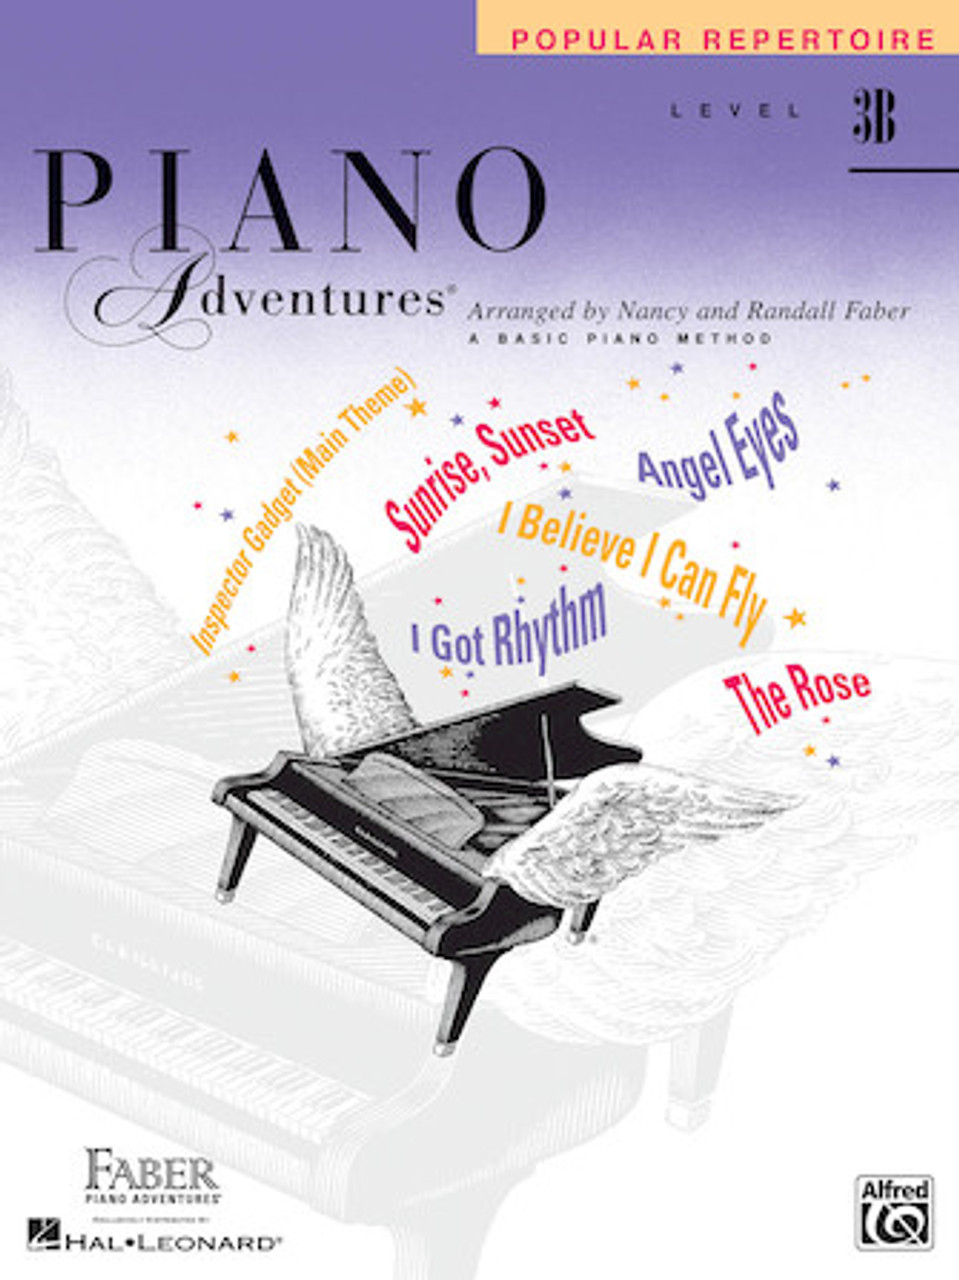 Adult Piano Adventures® Now in E-Book Format - Faber Piano Adventures